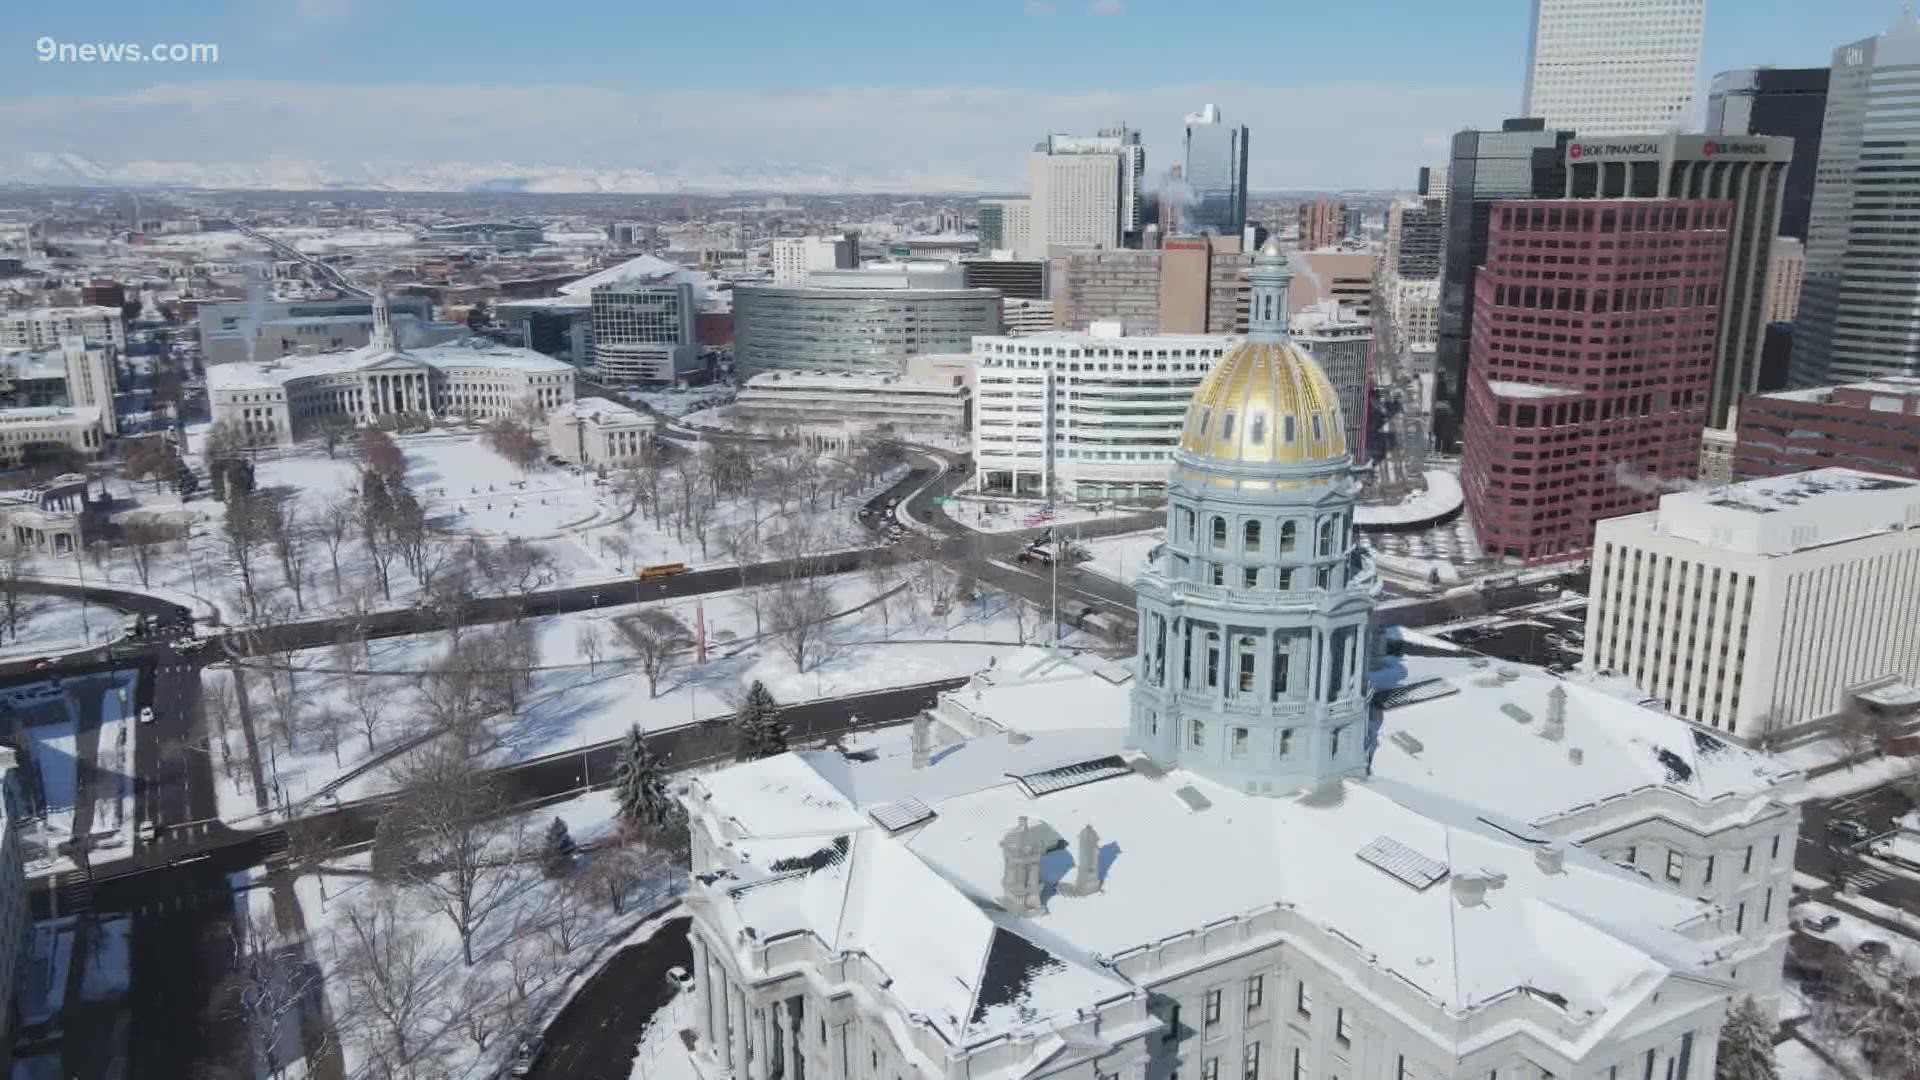 Colorado is shoring up its cyber security as the governor announced sanctions against Russia over its invasion of Ukraine. But what is actually under threat here?